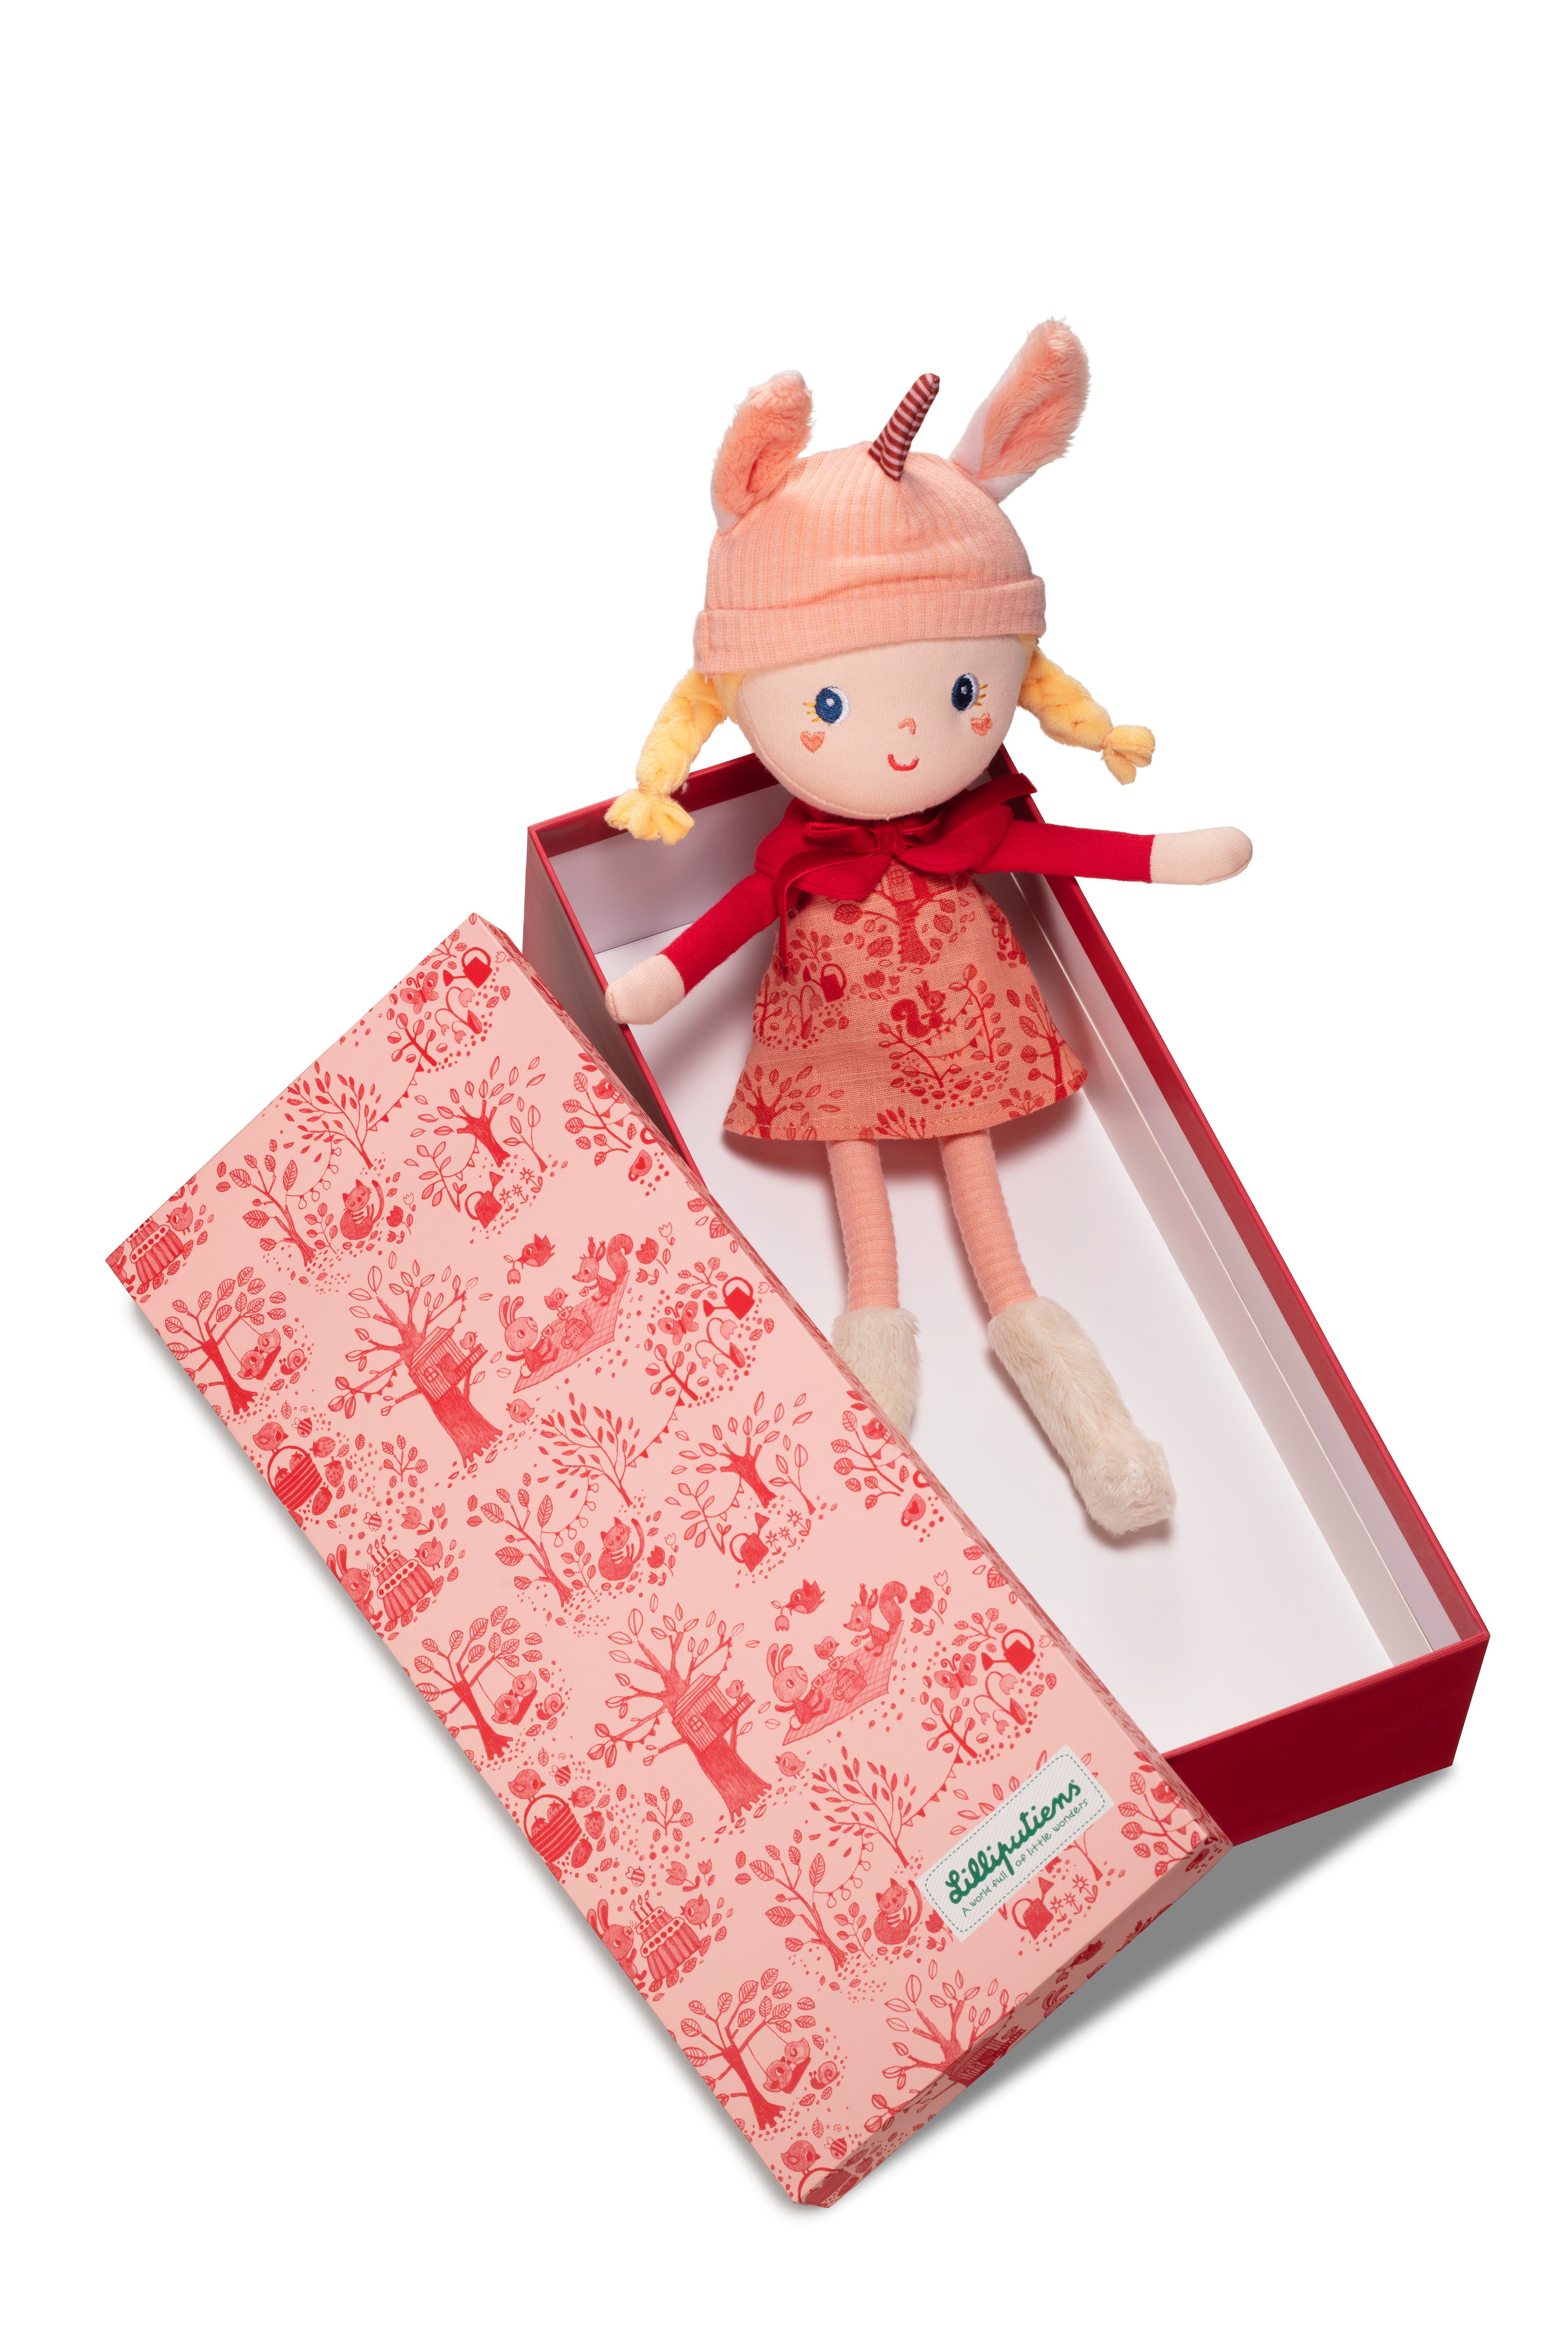 Lilliputiens Lena the Cuddly Doll - In Gift Box